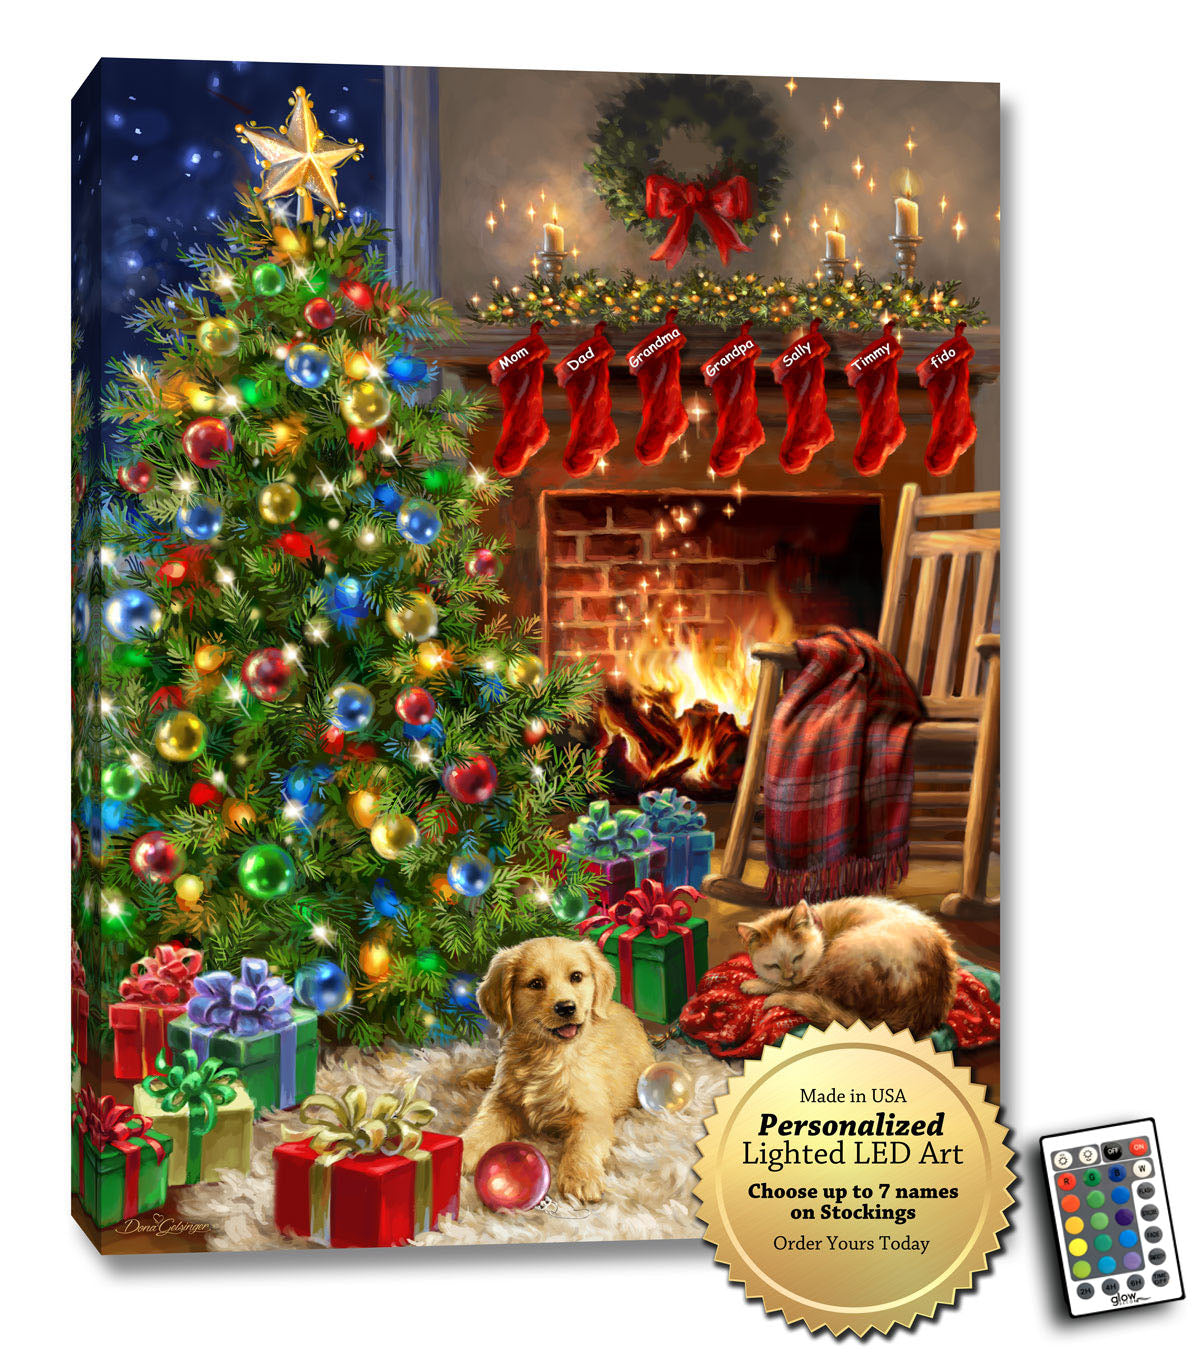 This stunning piece of wall art features a beautifully designed living room scene complete with a Christmas tree, stockings hung with care, a roaring fireplace, presents waiting to be unwrapped, and even a playful puppy and kitten.  What sets our Cozy Christmas wall art apart is the ability to personalize the name on the stockings and present tags.